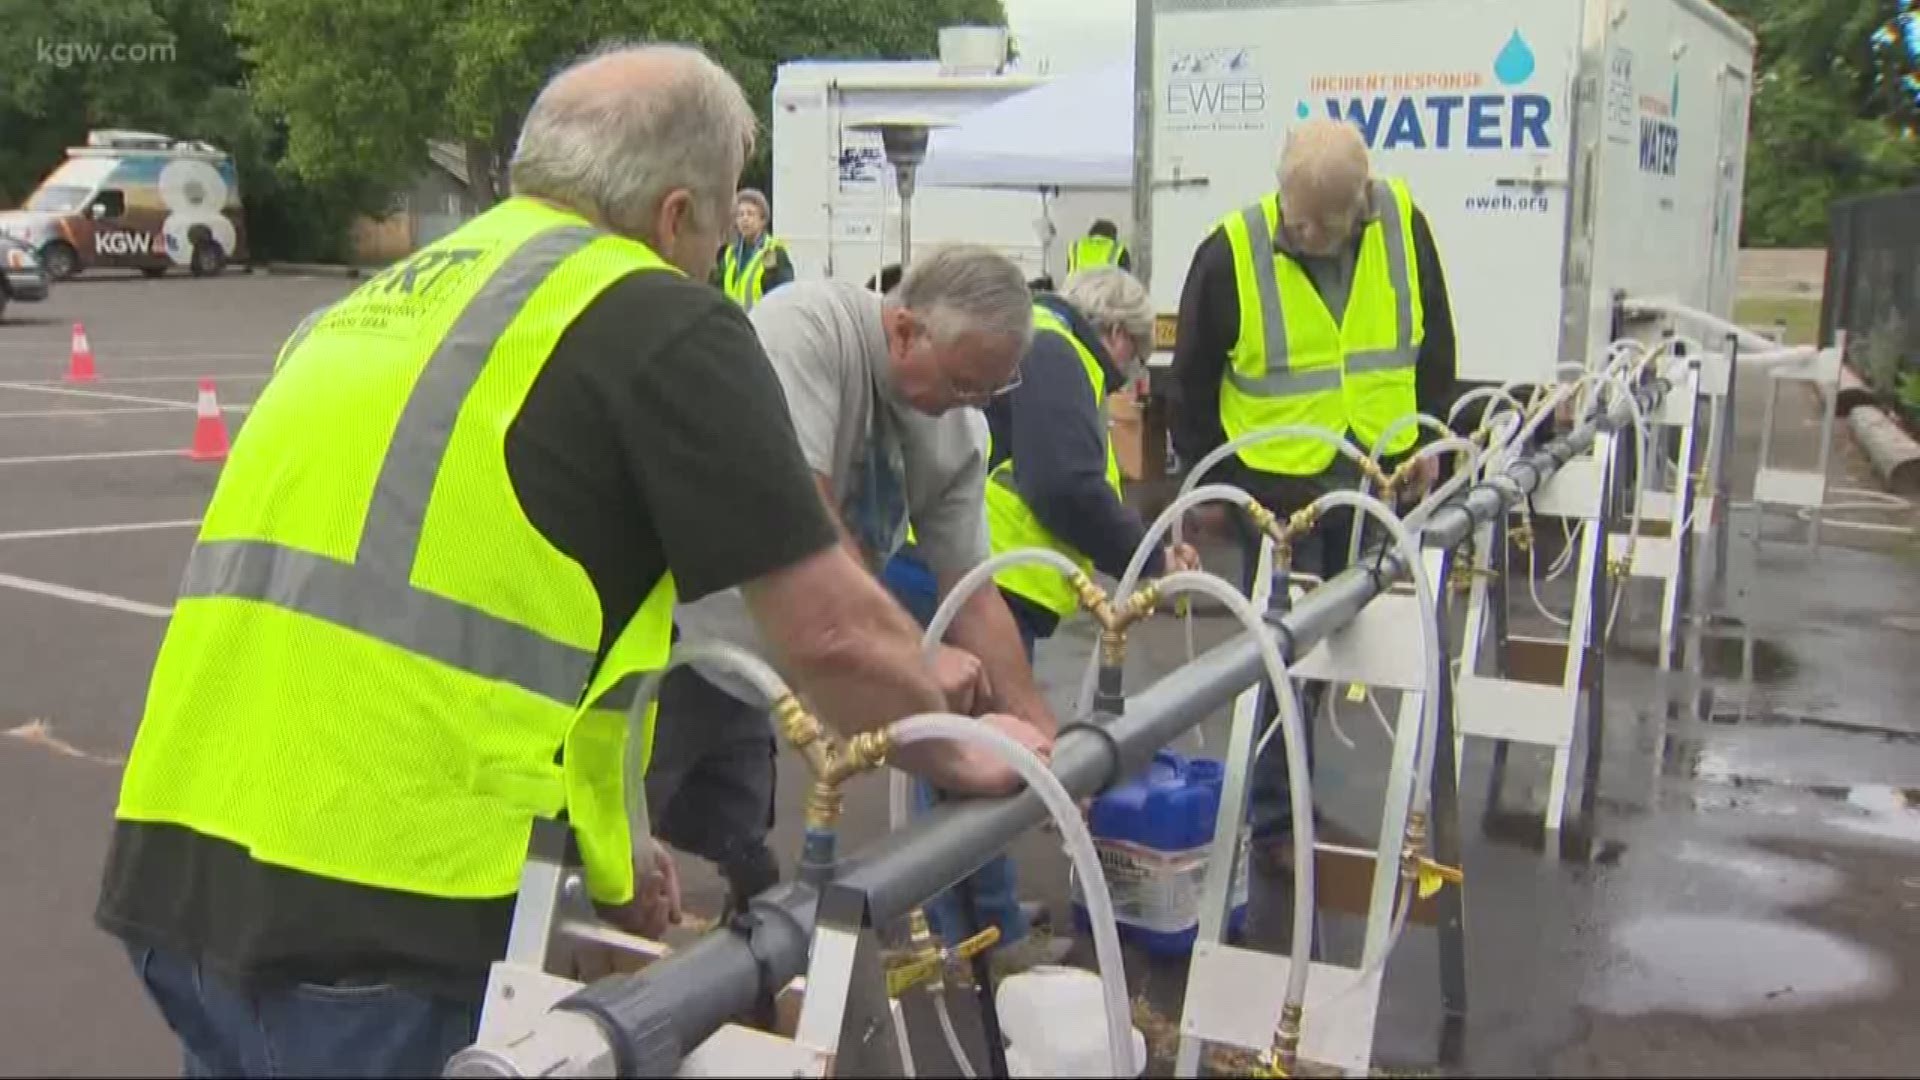 As Salem's water crisis continues, many residents are heading nort to Keizer to get their water. Here's where to get free water near Salem: https://on.kgw.com/2H5X5zq